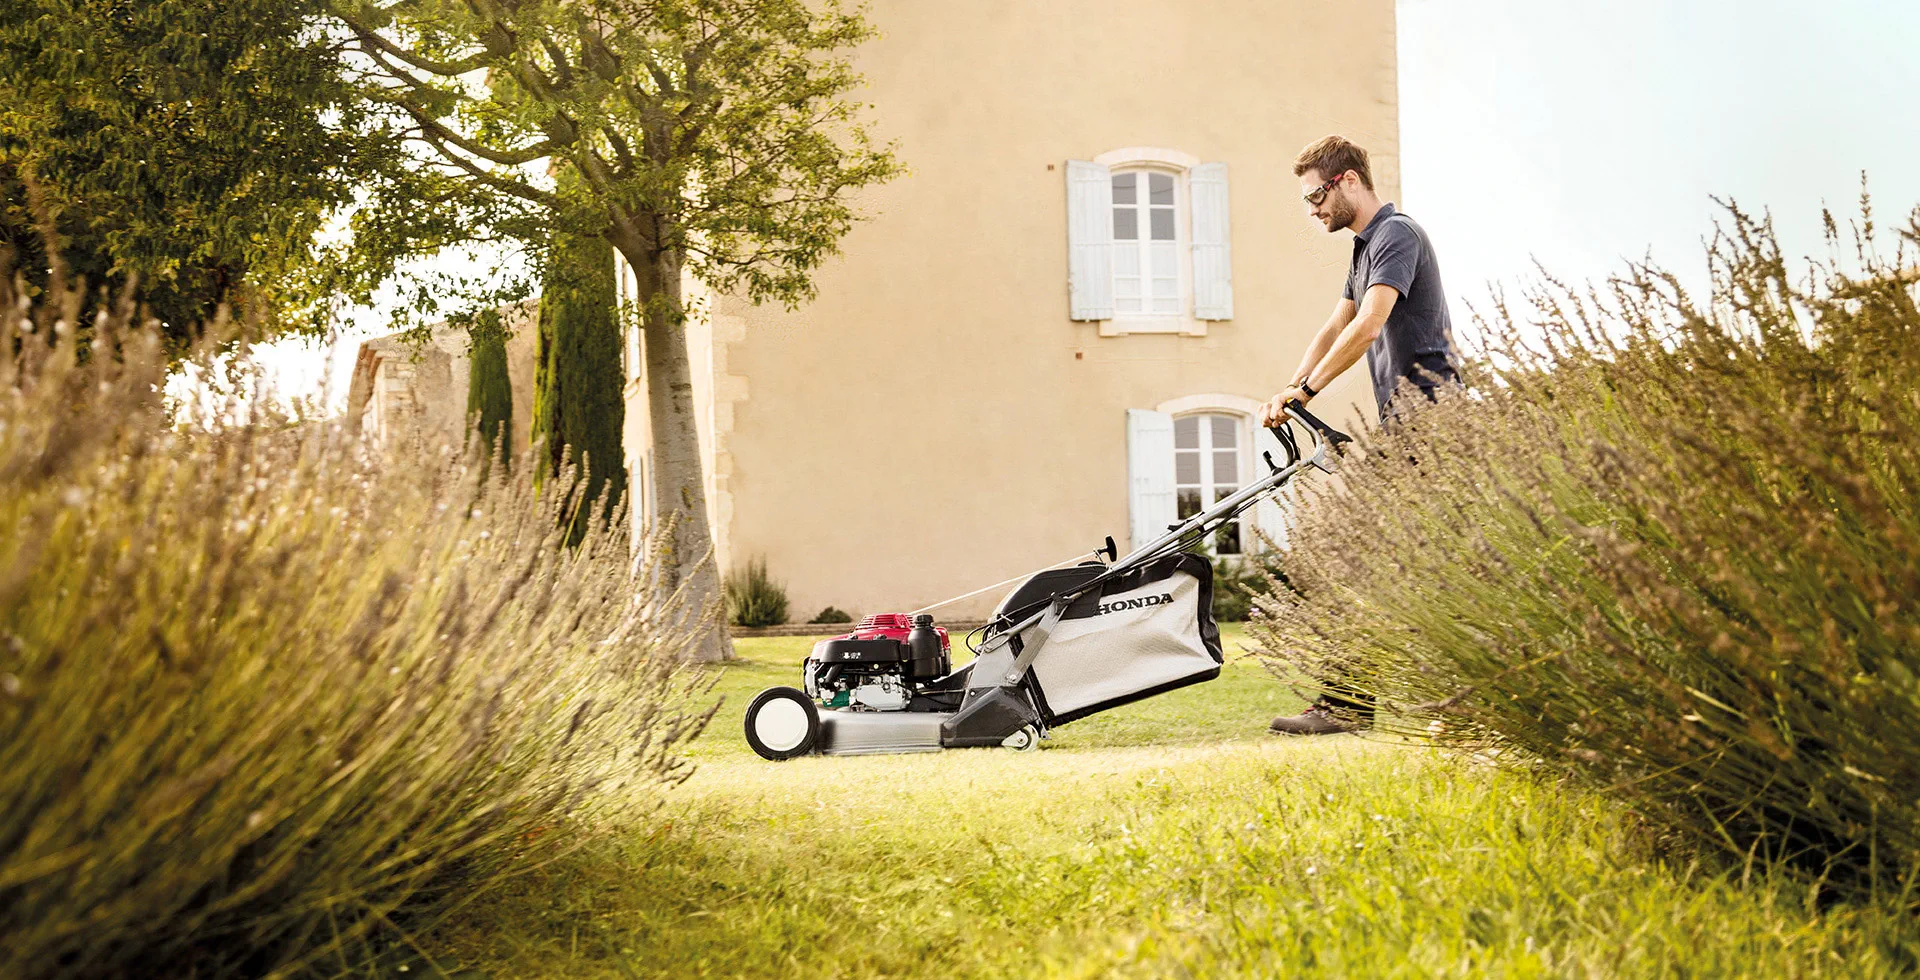 Honda Lawn Mowers Middle East and Africa